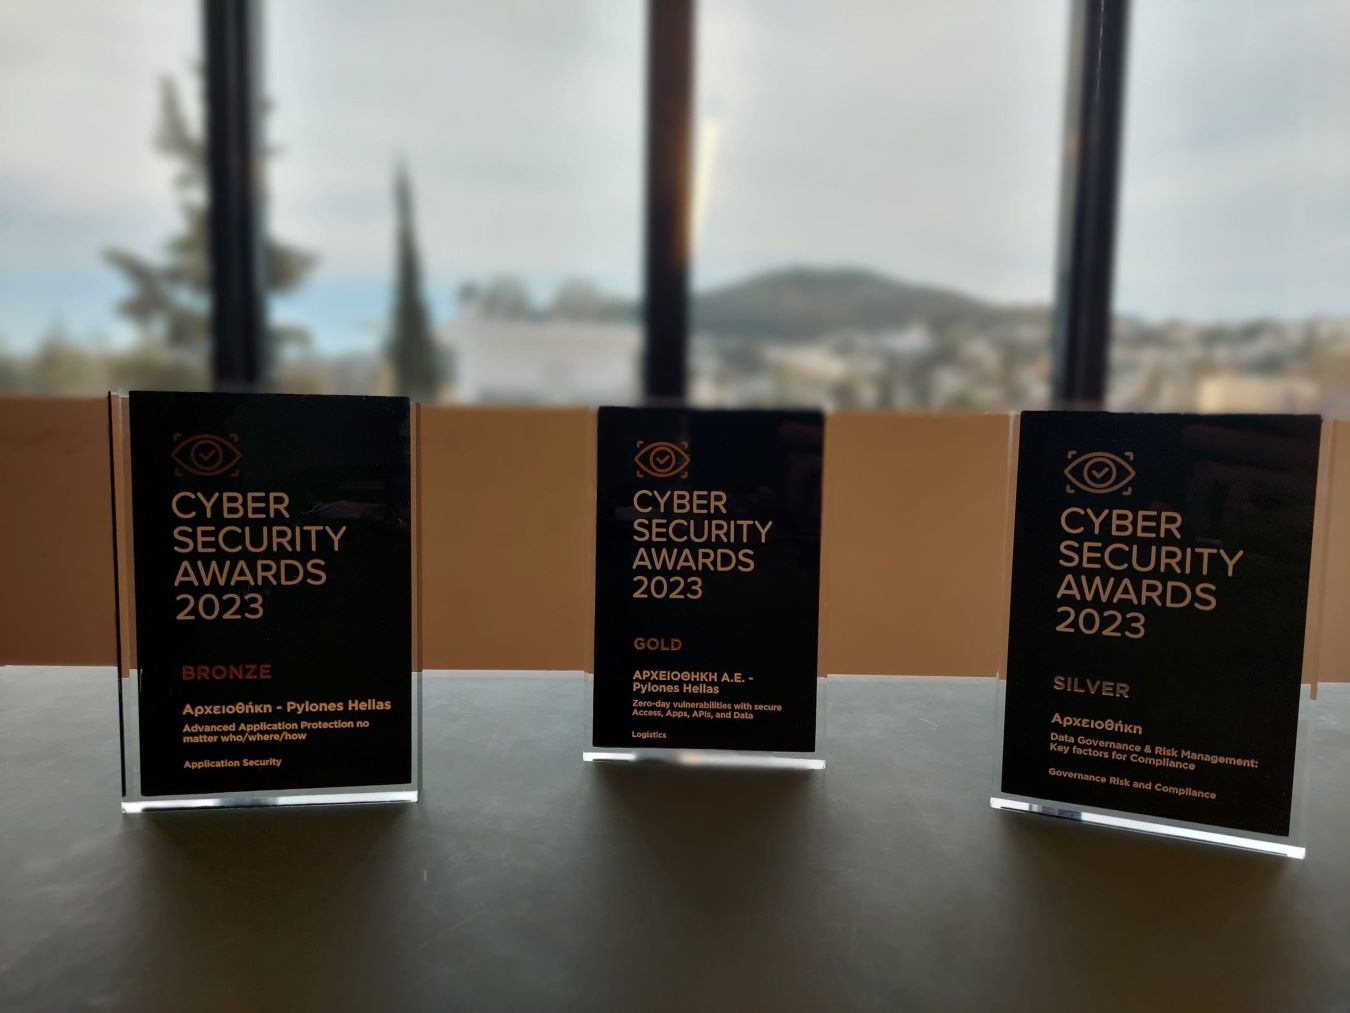 Cyber Security Awards 2023